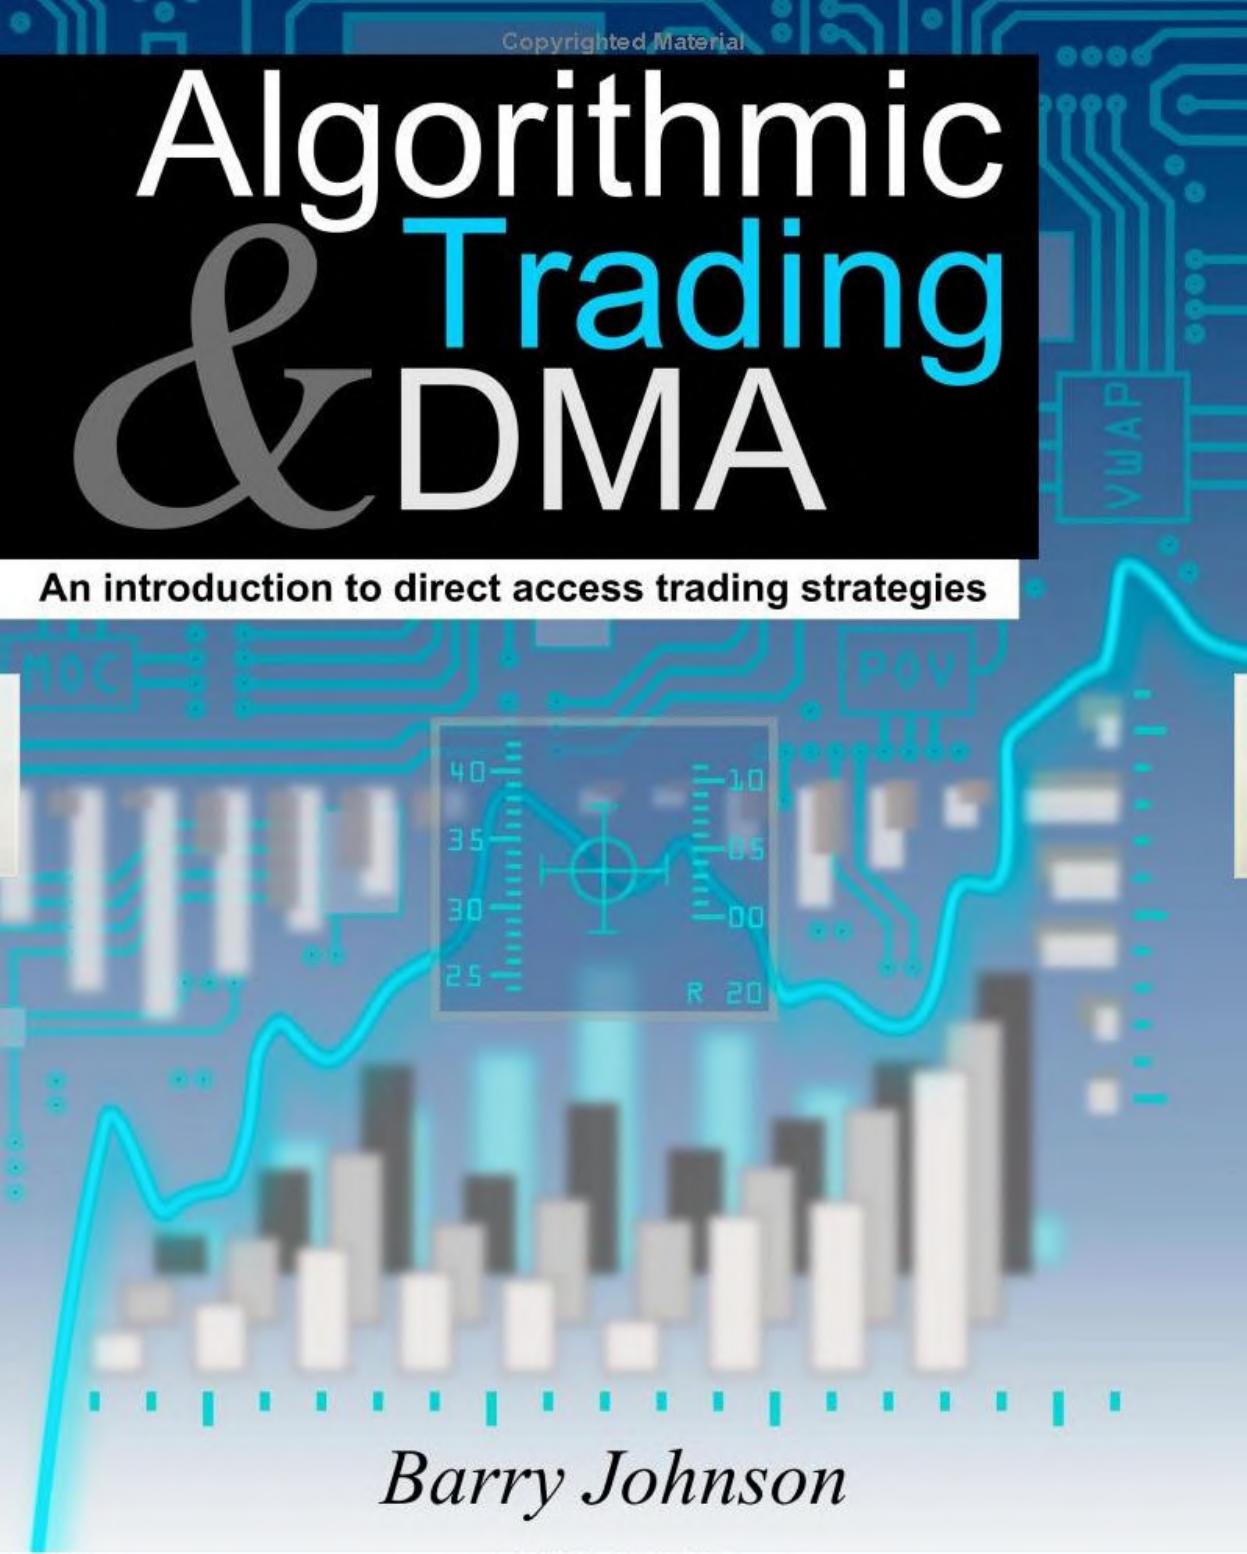 Algorithmic Trading and DMA An introduction to direct access trading strategies - Wei Zhi.jpg